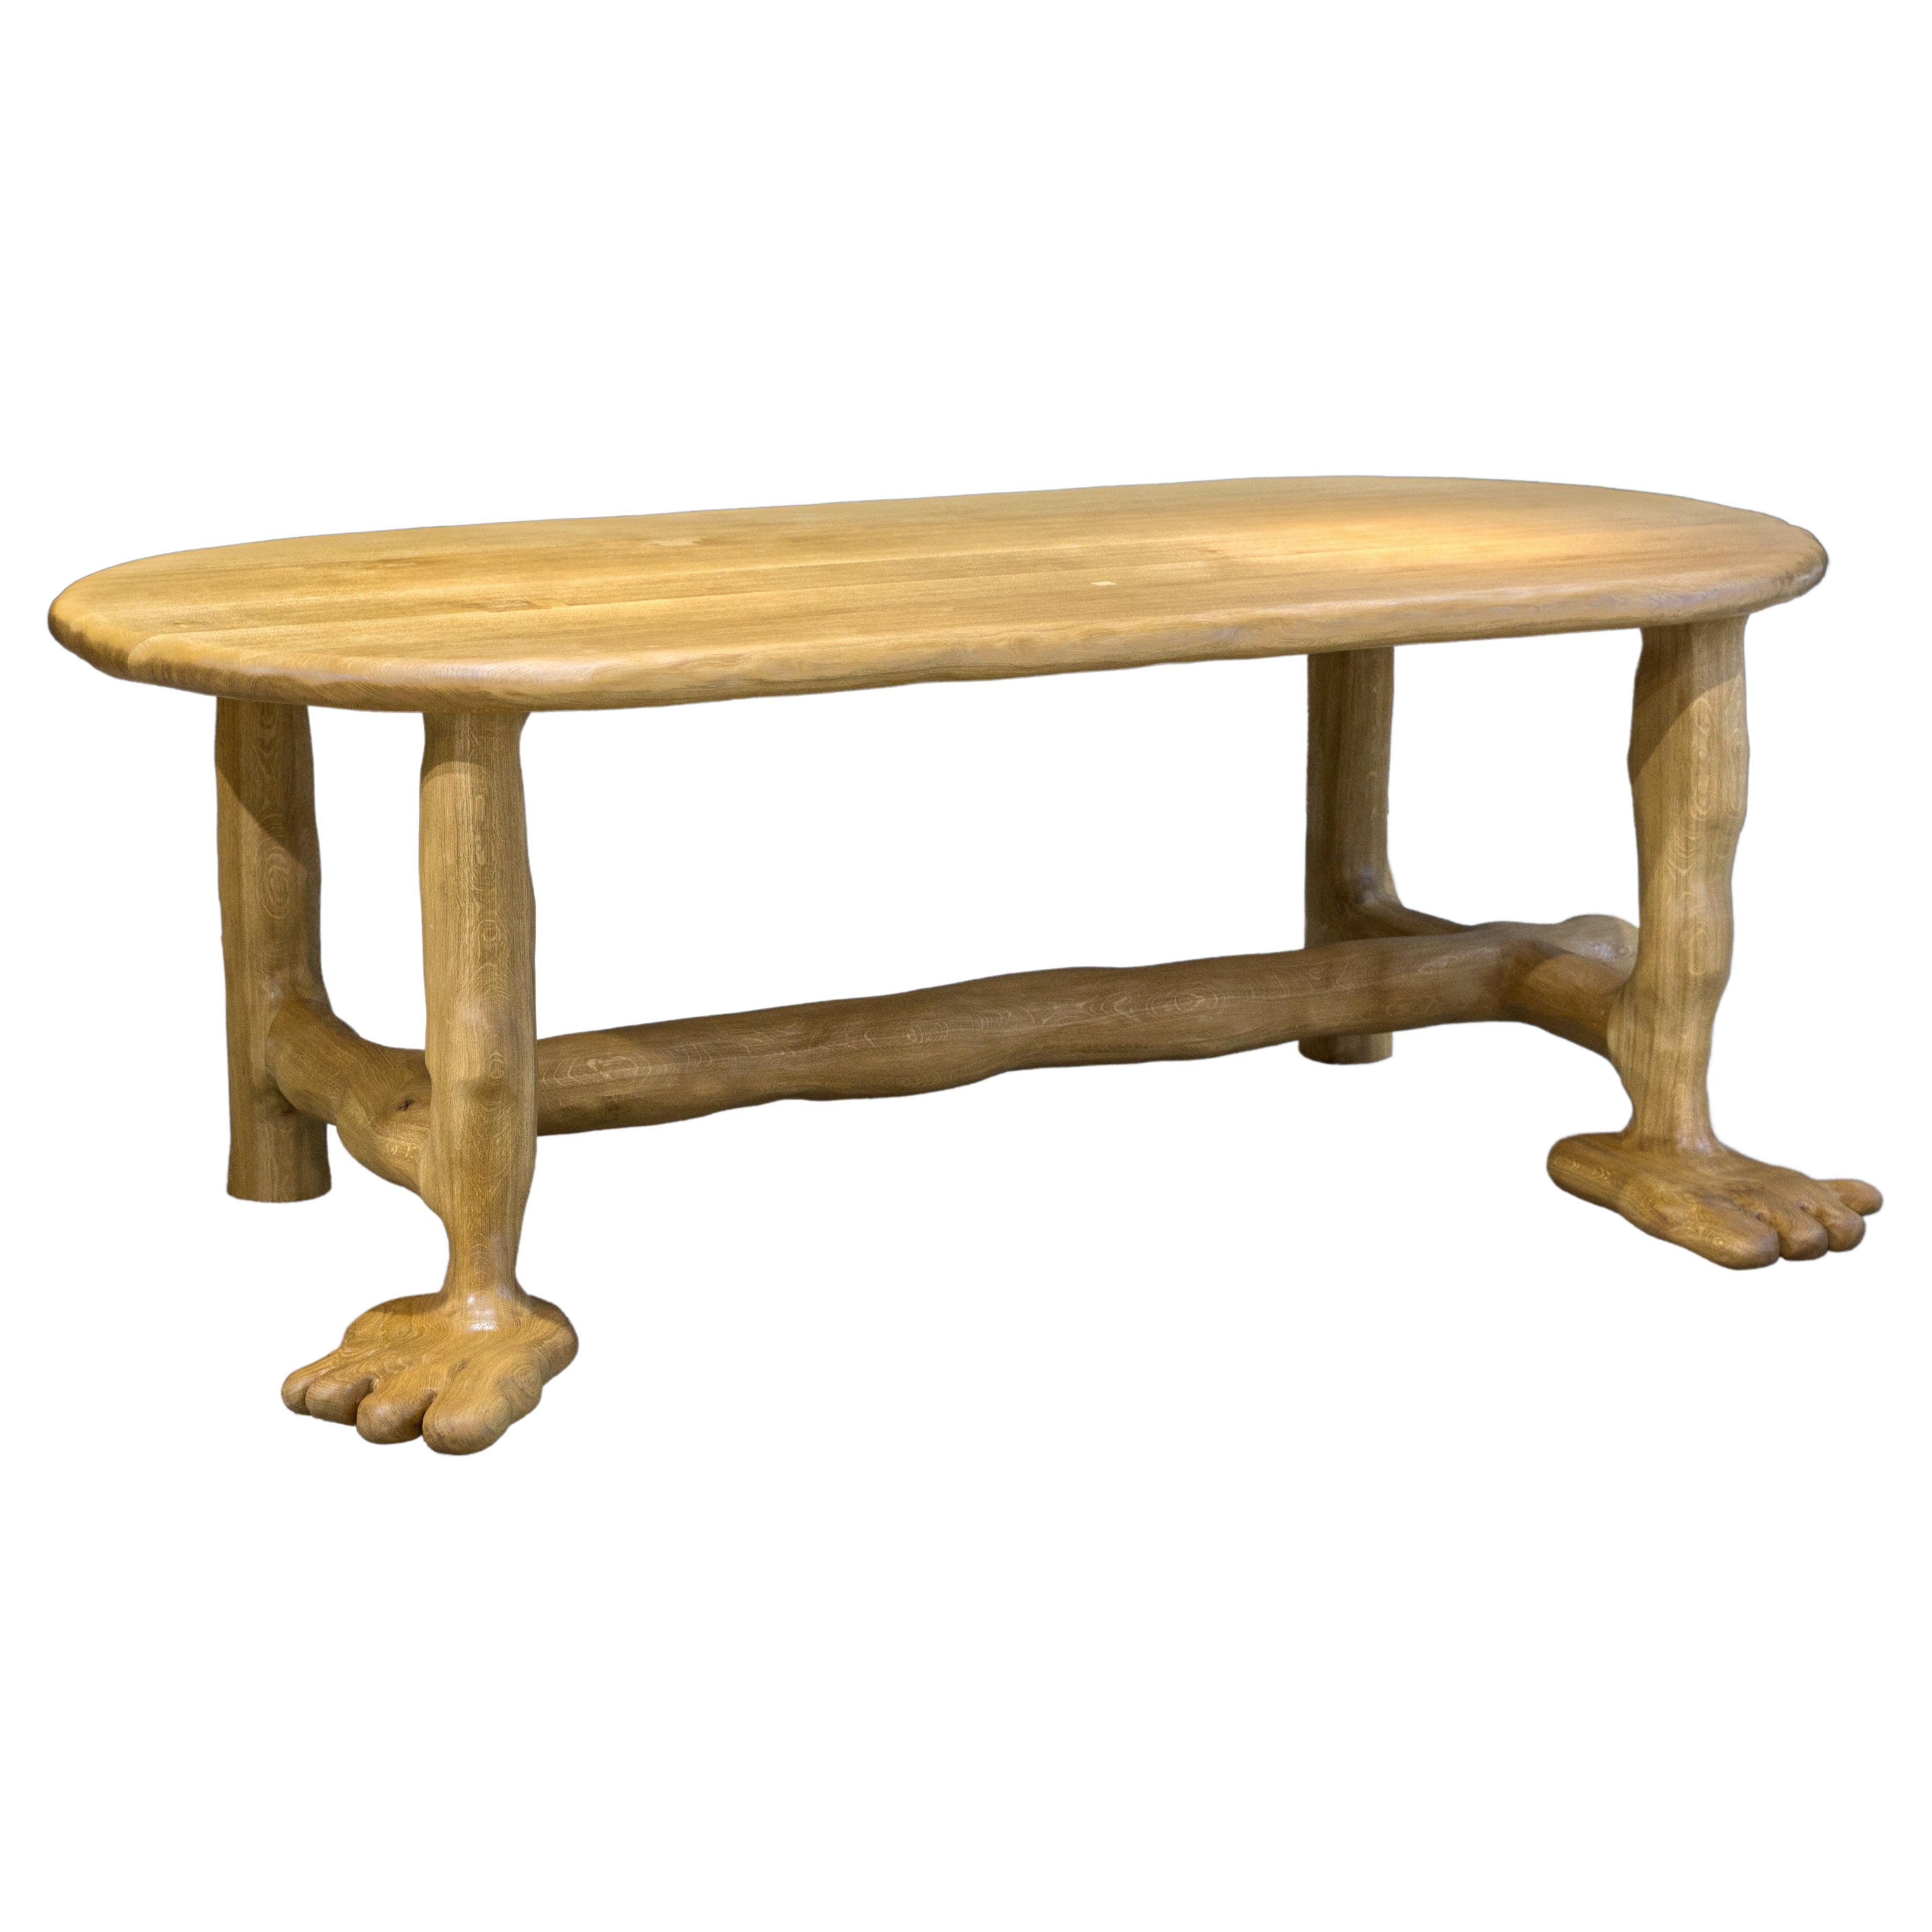 The Leg Dining Table - Sculptural Table in Oak Wood For Sale